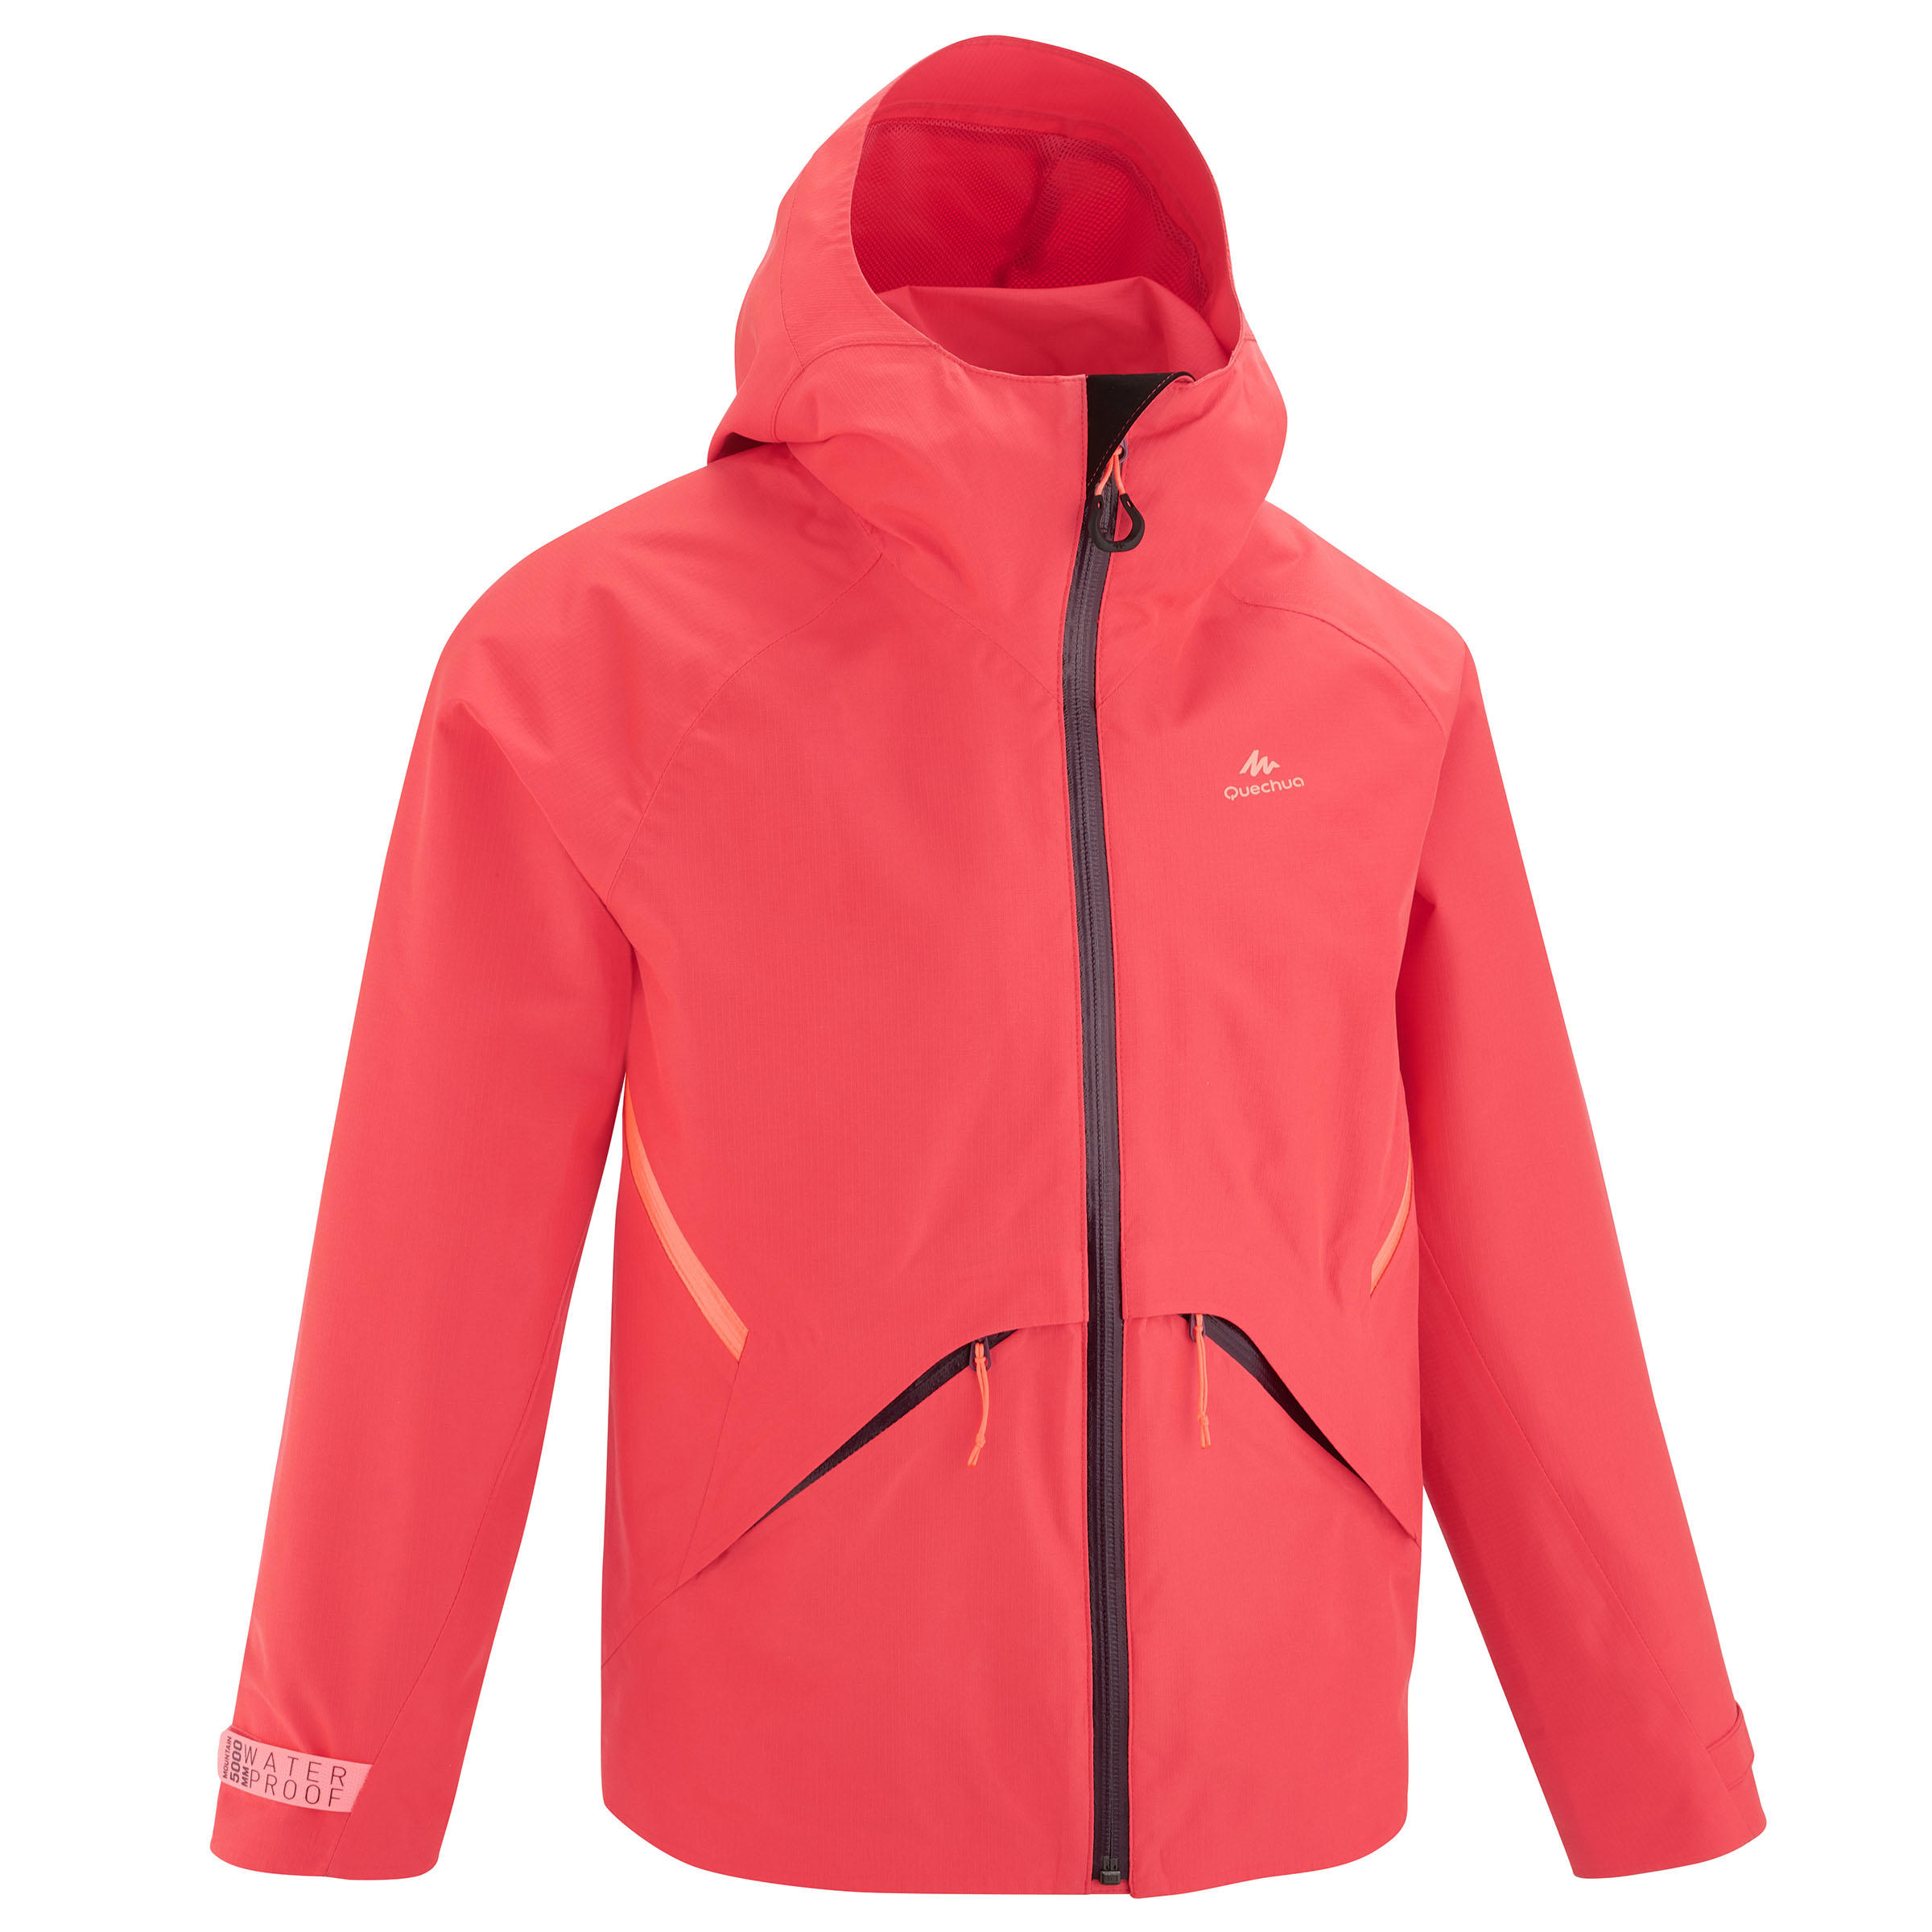 QUECHUA Kids’ Waterproof Hiking Jacket - MH900 - coral - Age 7-15 years